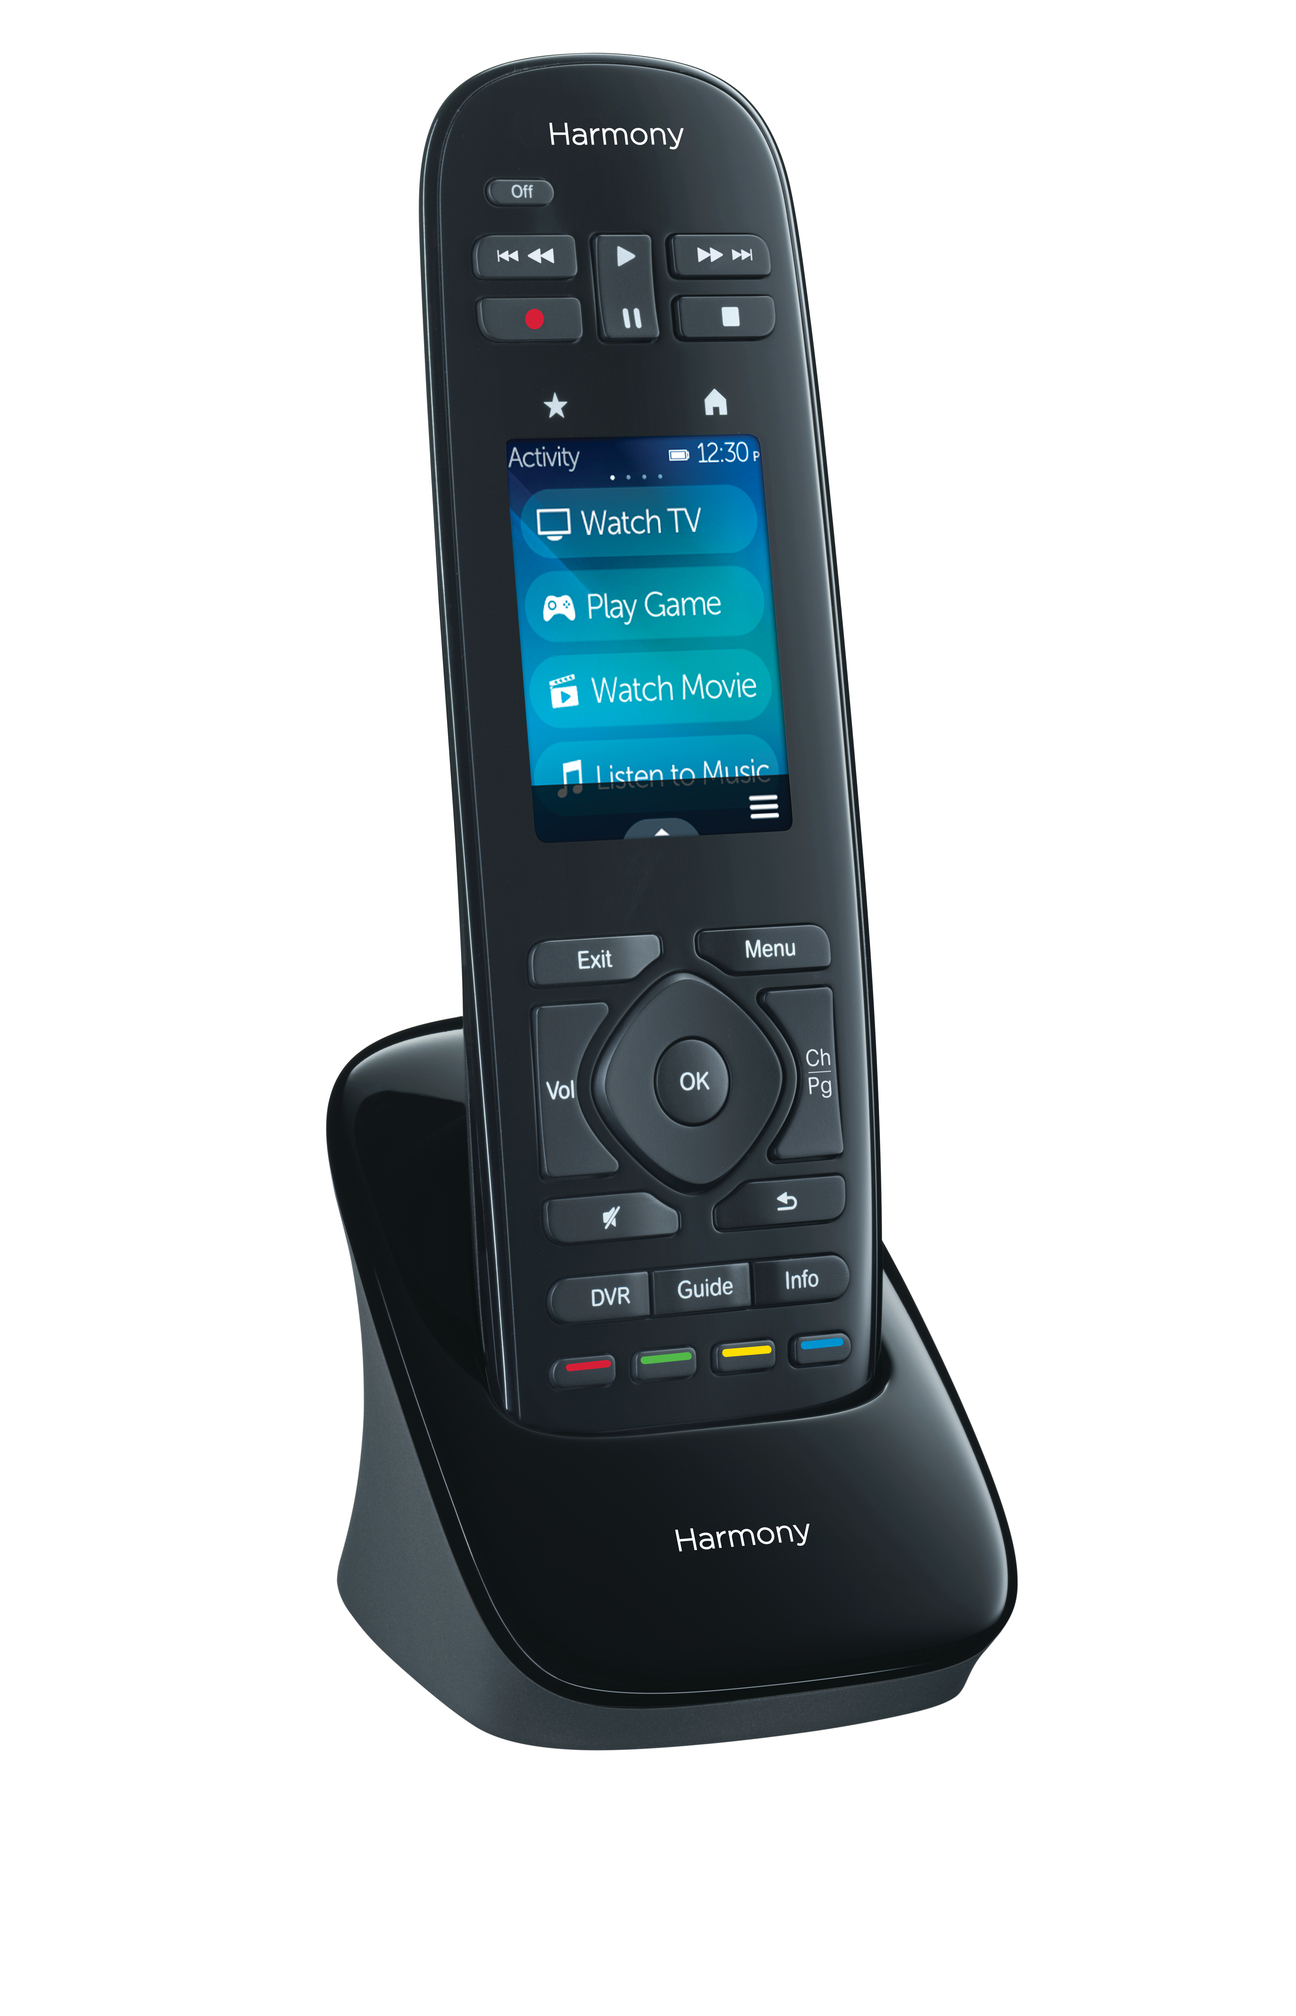 Logitech Reimagines Home Control with Advanced Universal Remotes | Business Wire